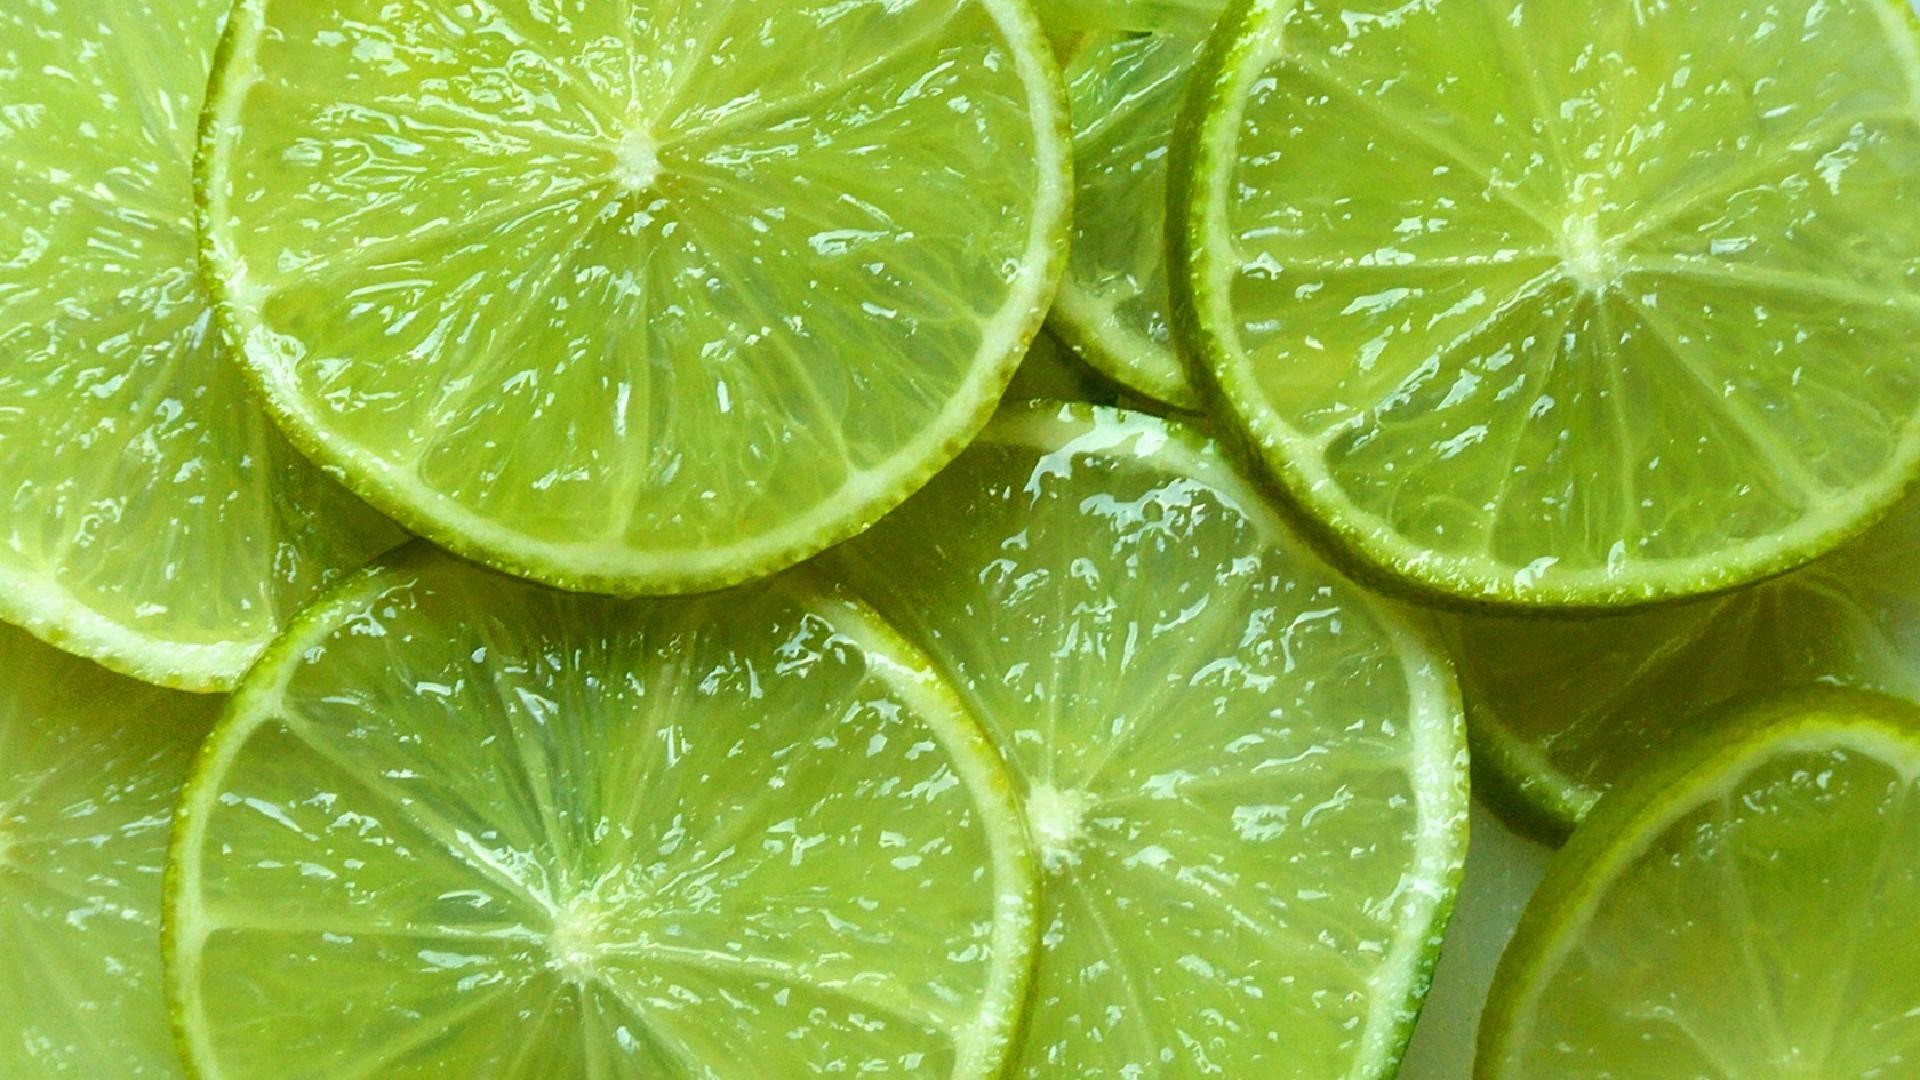 Wallpaper HD Lime Green With Resolution 1920X1080 pixel. You can make this wallpaper for your Desktop Computer Backgrounds, Mac Wallpapers, Android Lock screen or iPhone Screensavers